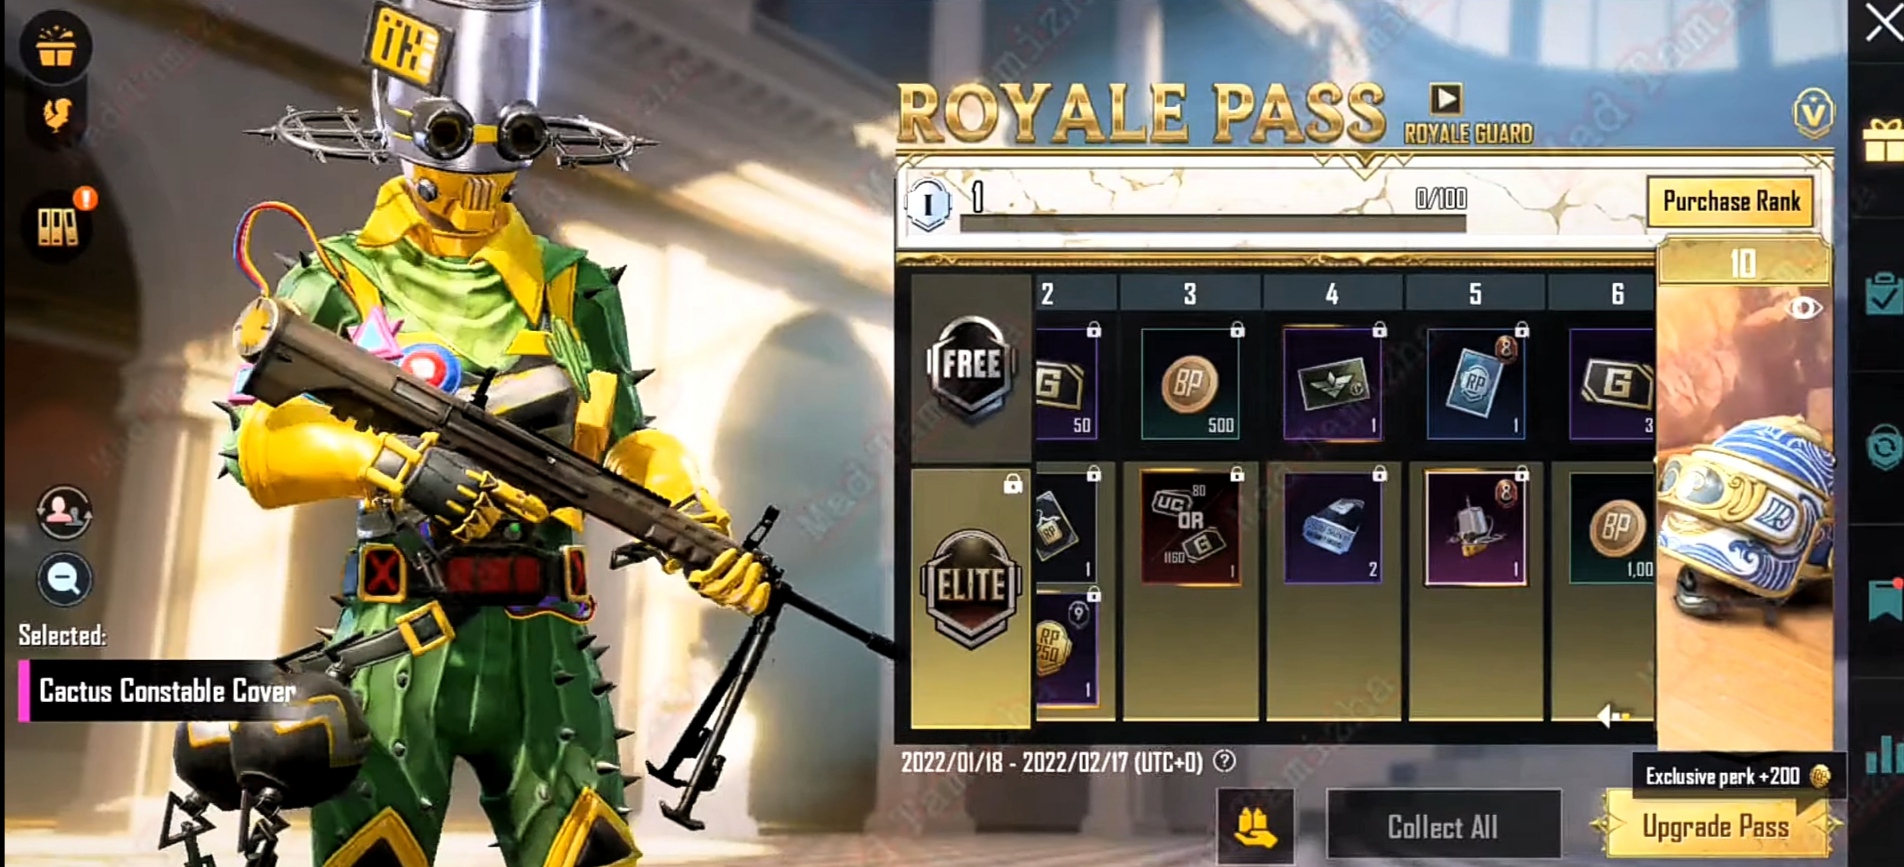 BGMI/PUBG Mobile Royale Pass Season C2S5 M8 1 to 50 RP leaked rewards and release date